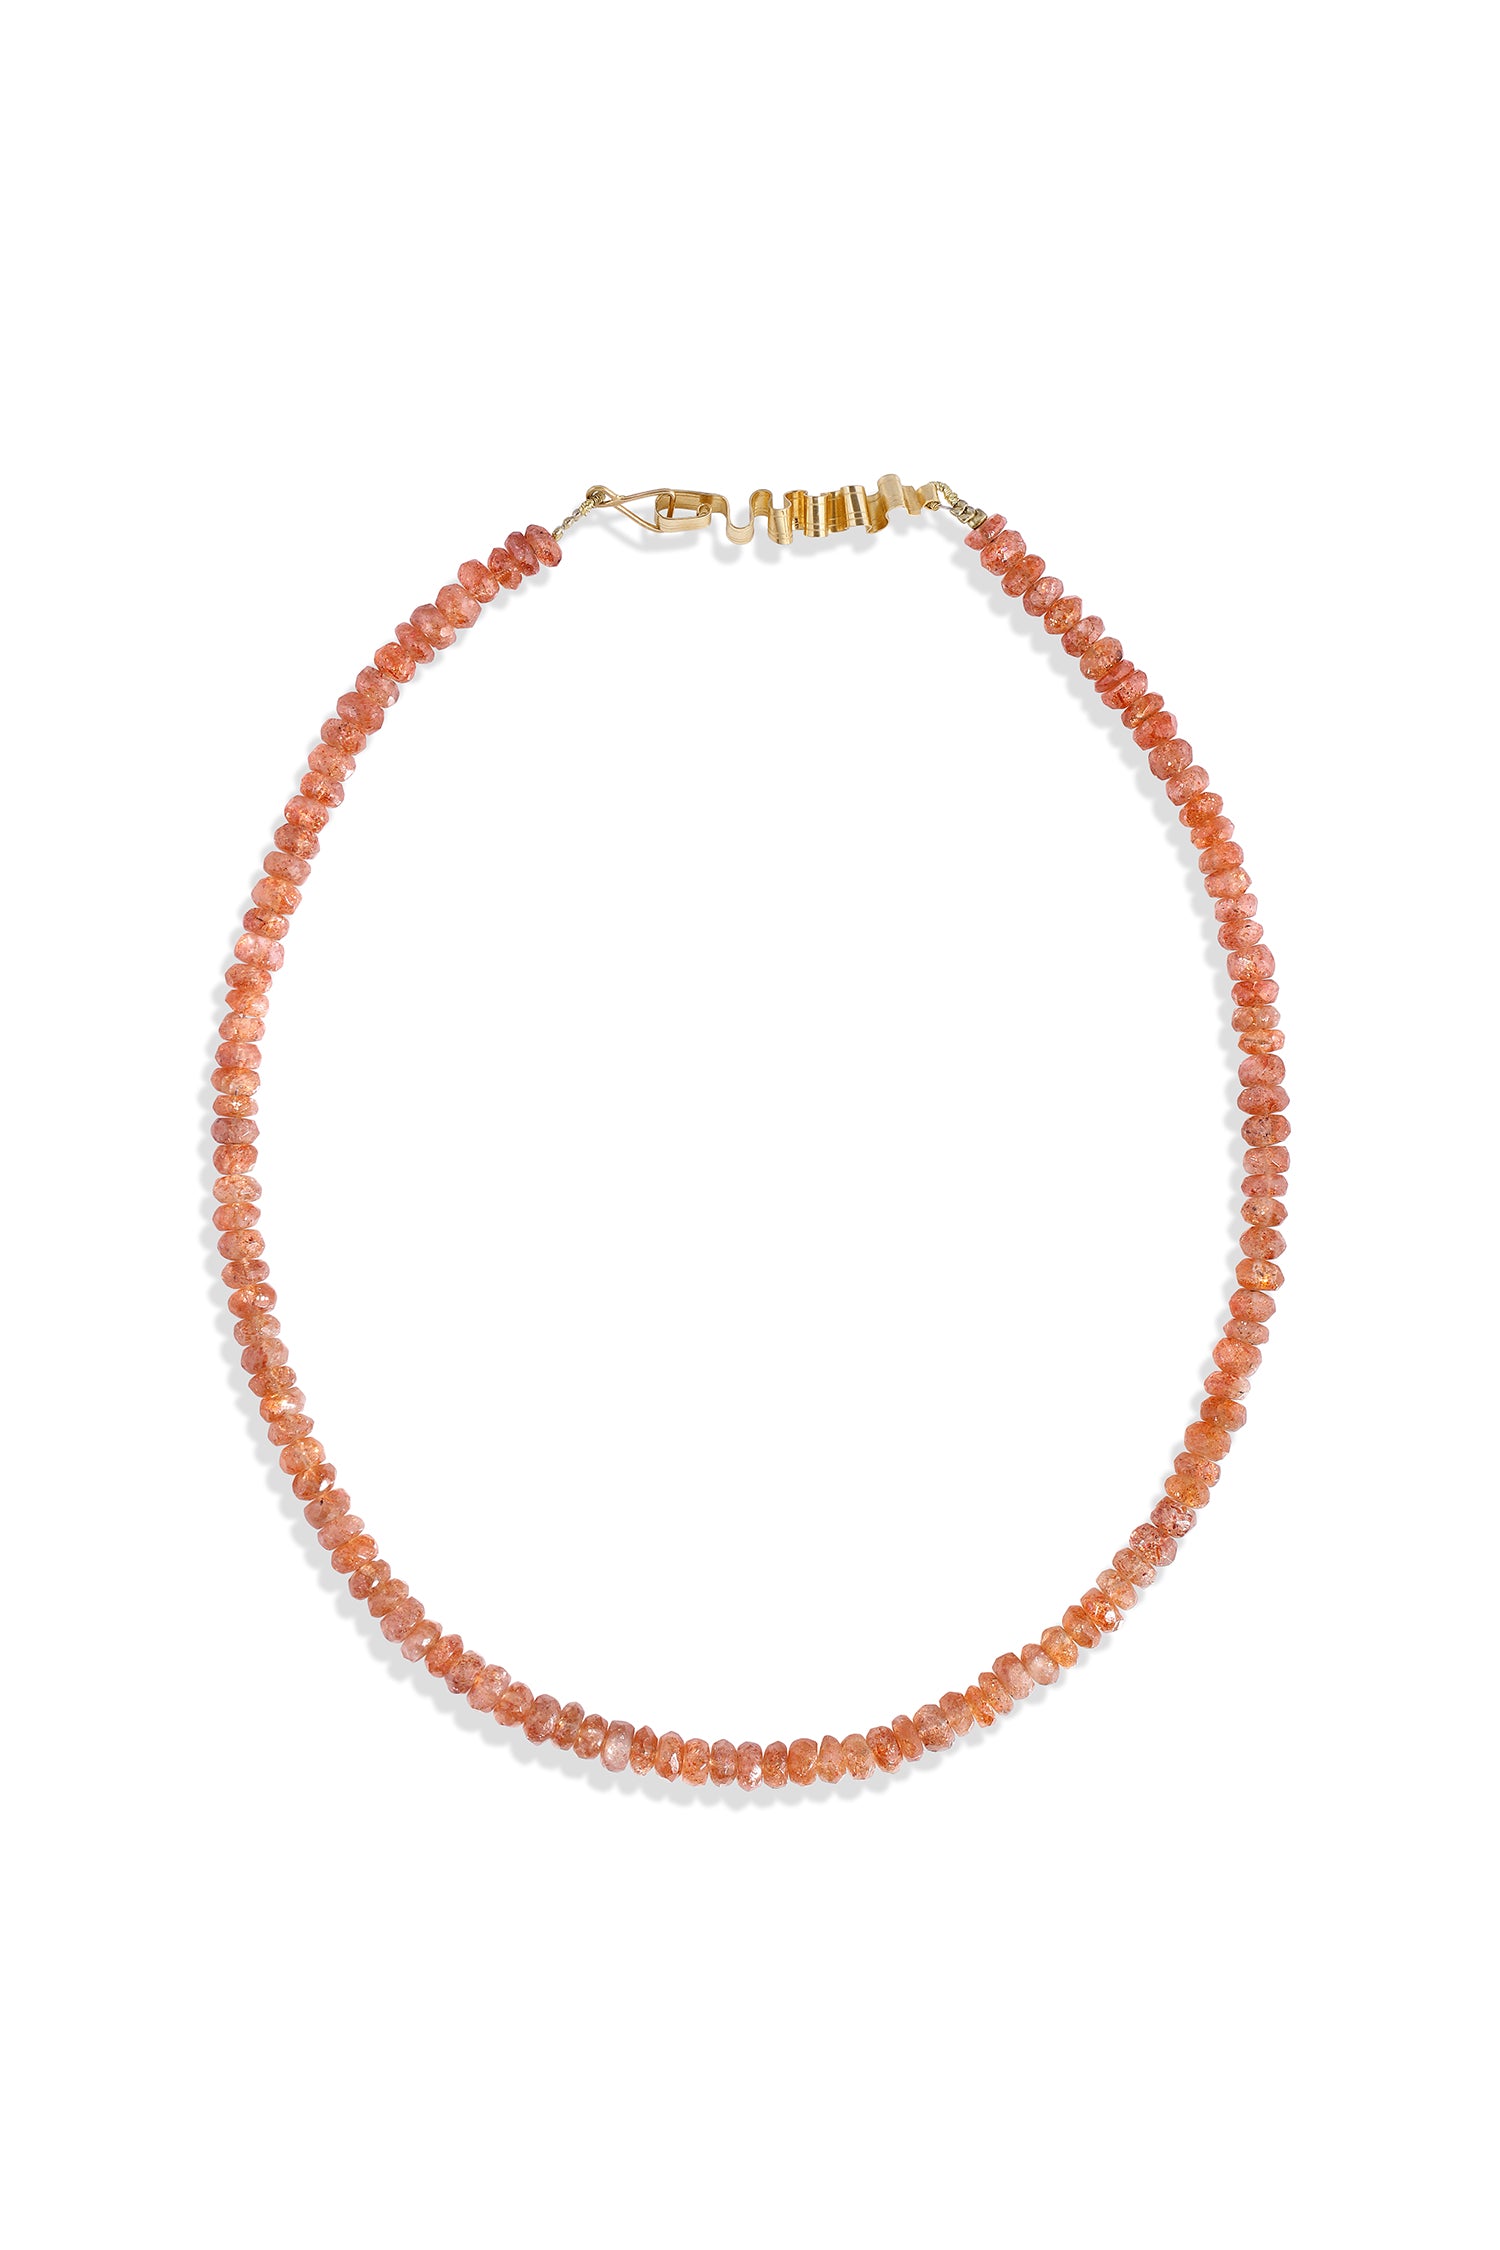 Sunstone Necklace with 14K Ribbon Clasp